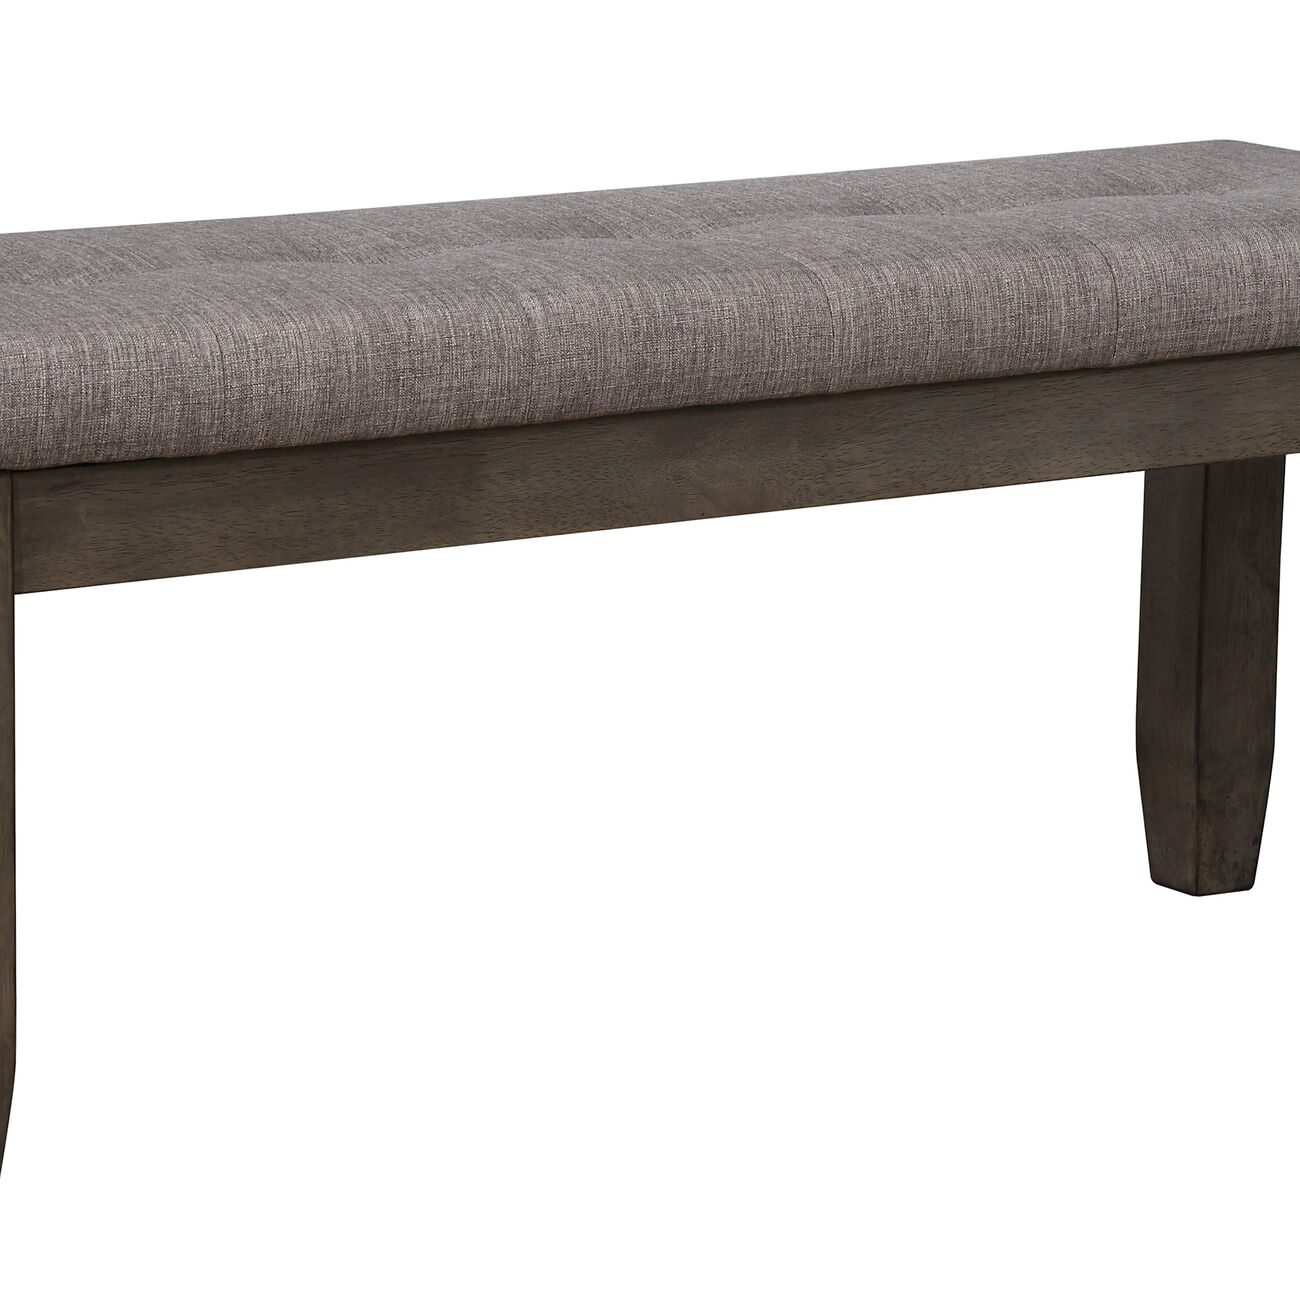 Two Tone Rectangular Bench with Fabric Upholstered Seat, Brown and Gray - BM215444